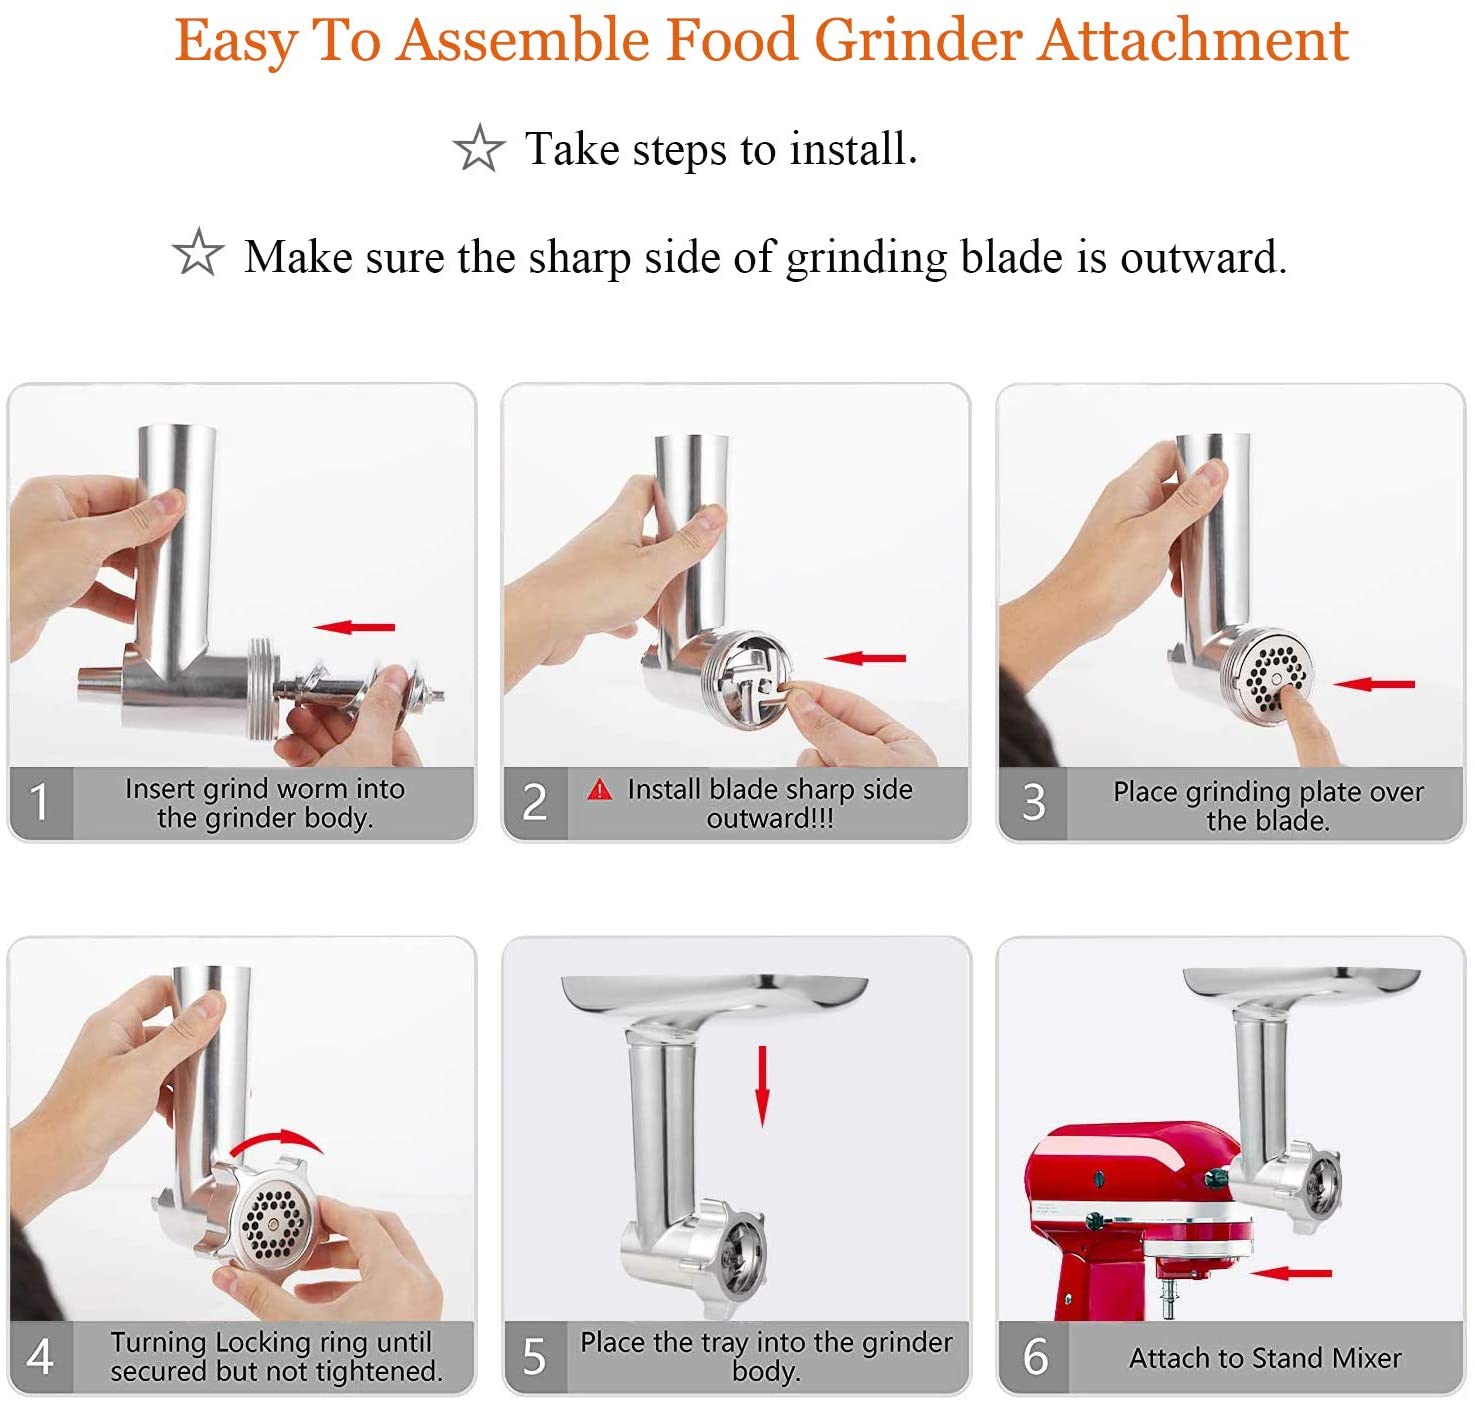 Meat Grinder Attachment for KitchenAid Stand Mixers, Accessories Included 2 Sausage Stuffer Tubes, Durable Metal Food Grinder Attachments by Kitchood, Silver - image 3 of 7